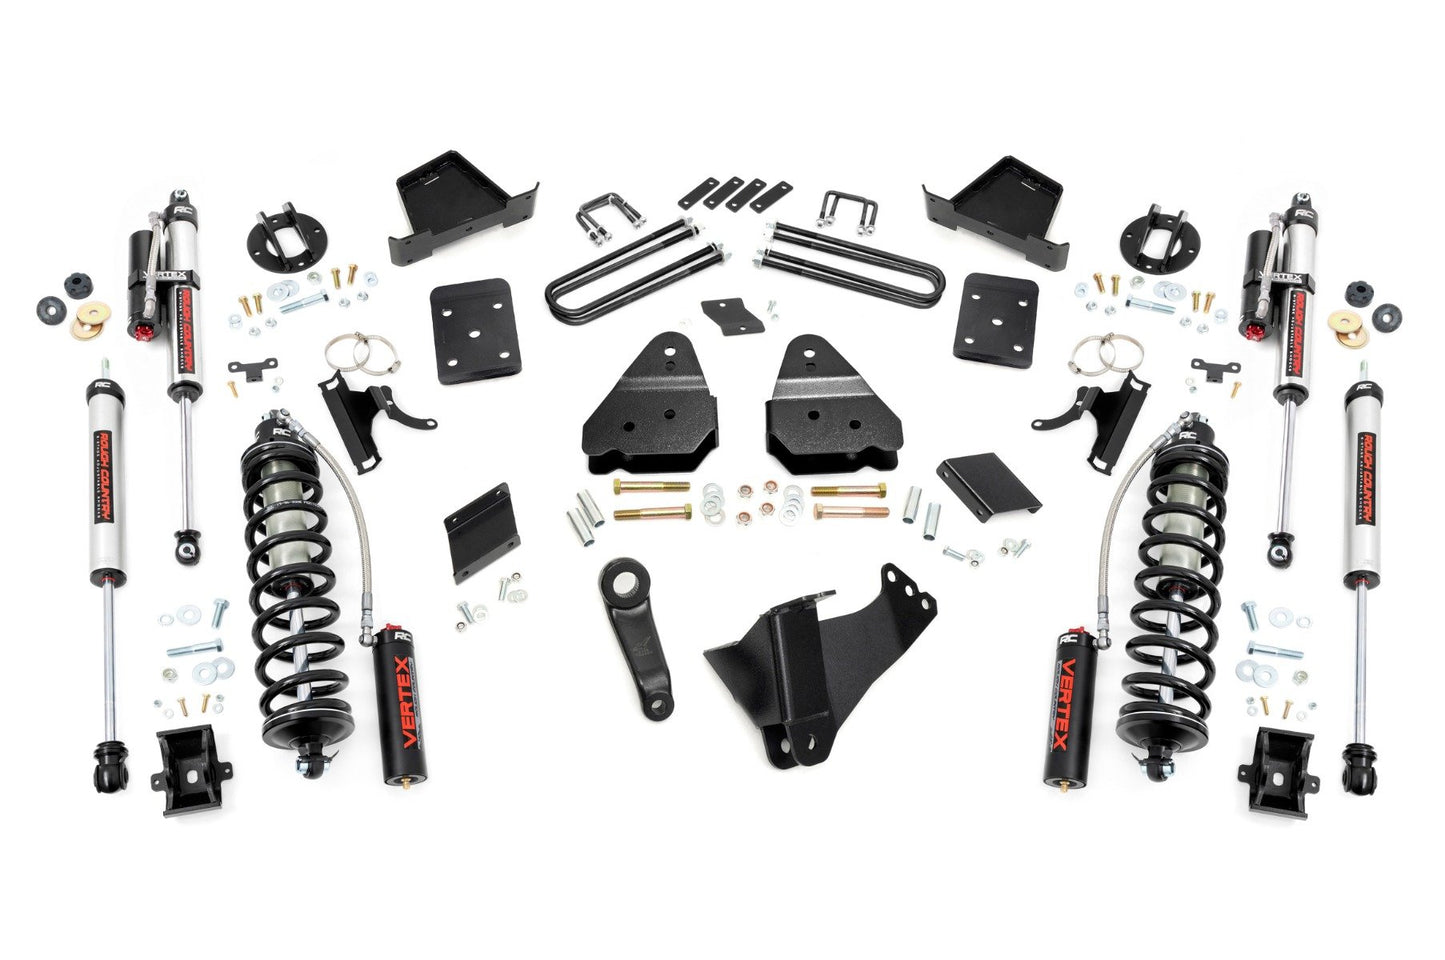 Rough Country 6 Inch Lift Kit  |  Diesel  |  No OVLD  |  C/O Vertex | Ford F-250 Super Duty (11-14)